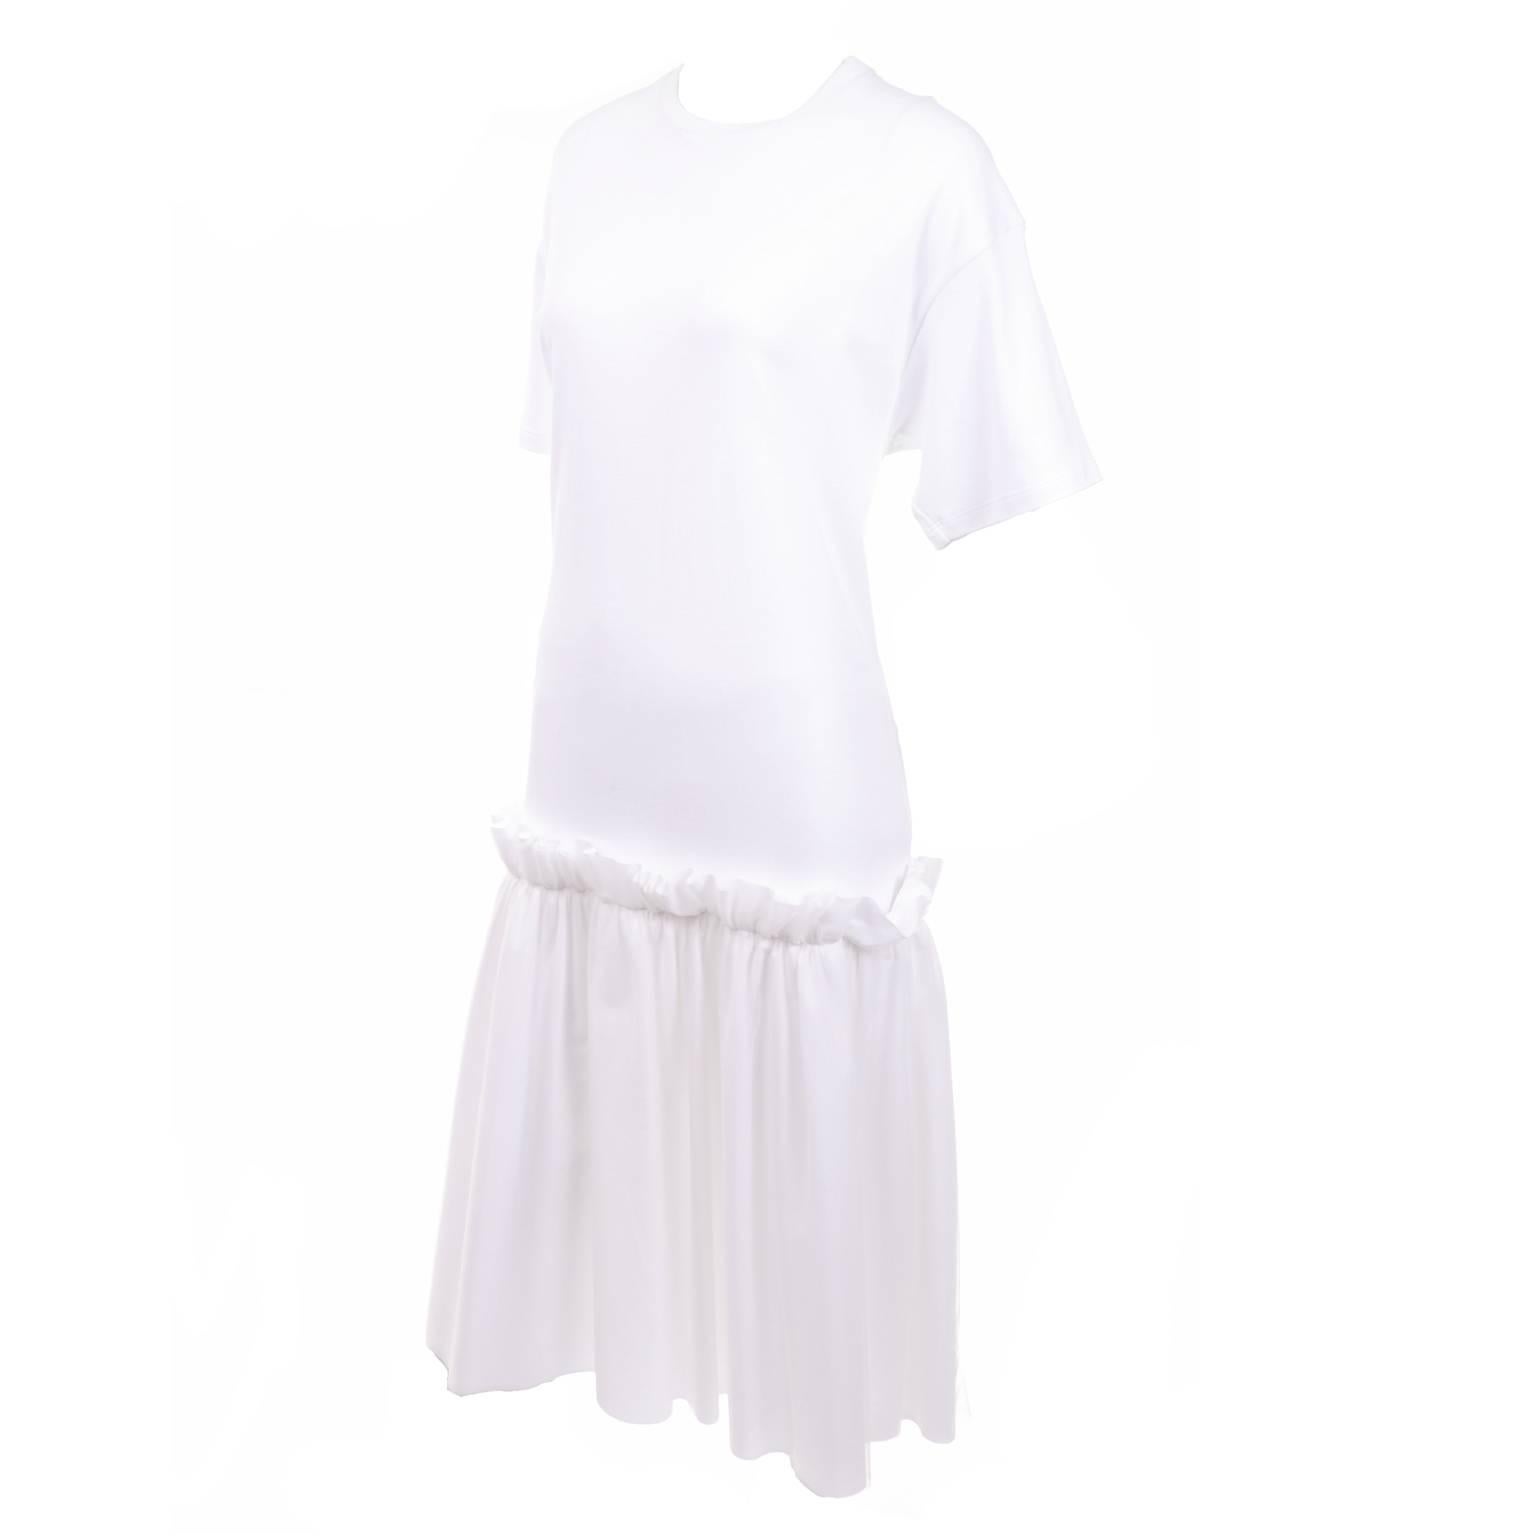 Simone Rocha Ikram White Cotton T Shirt Dress With Tulle Overlay and ...